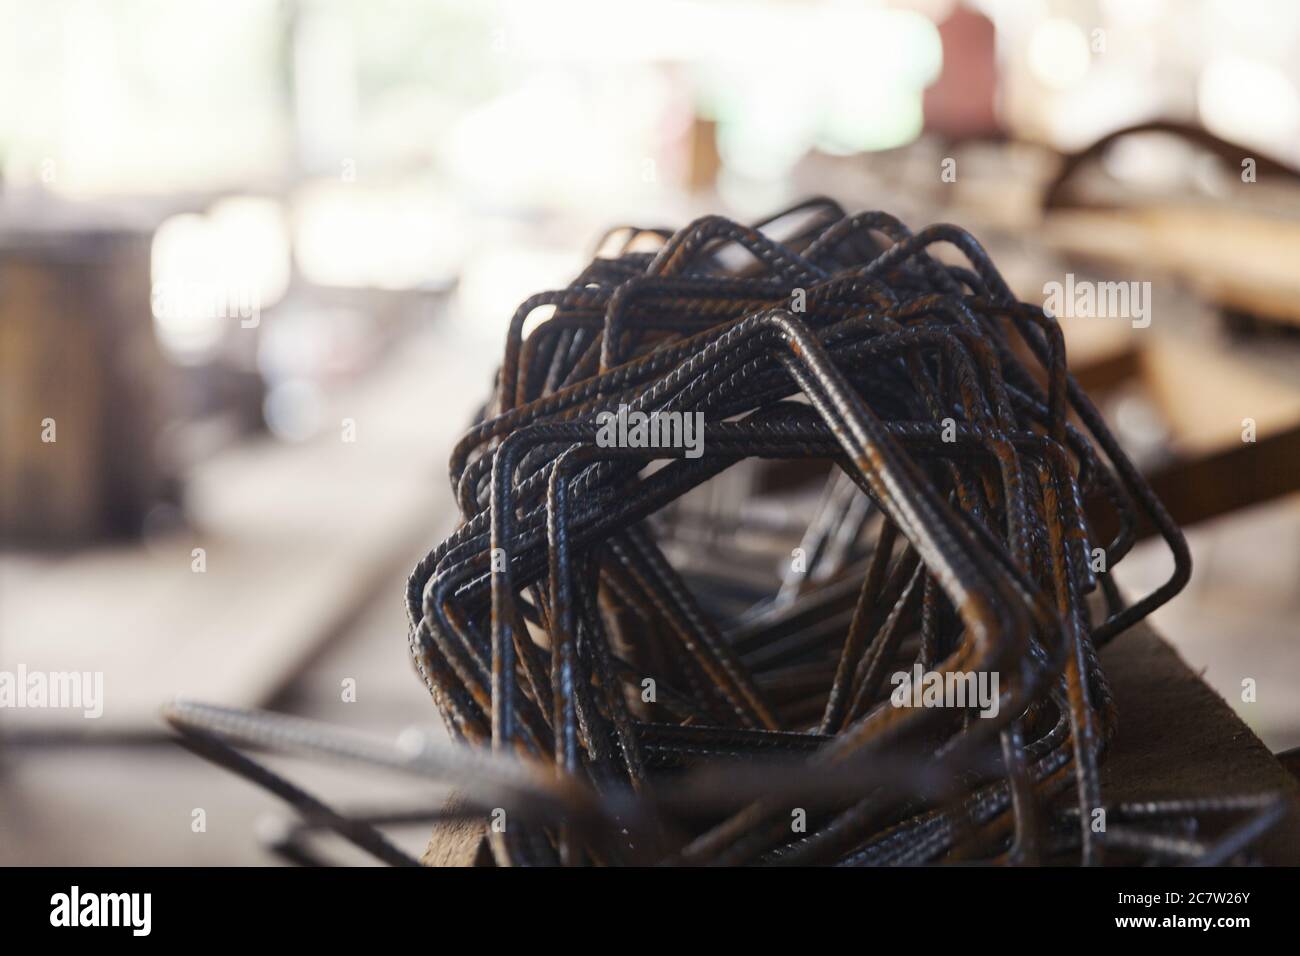 iron for reinforced concrete, close up Stock Photo